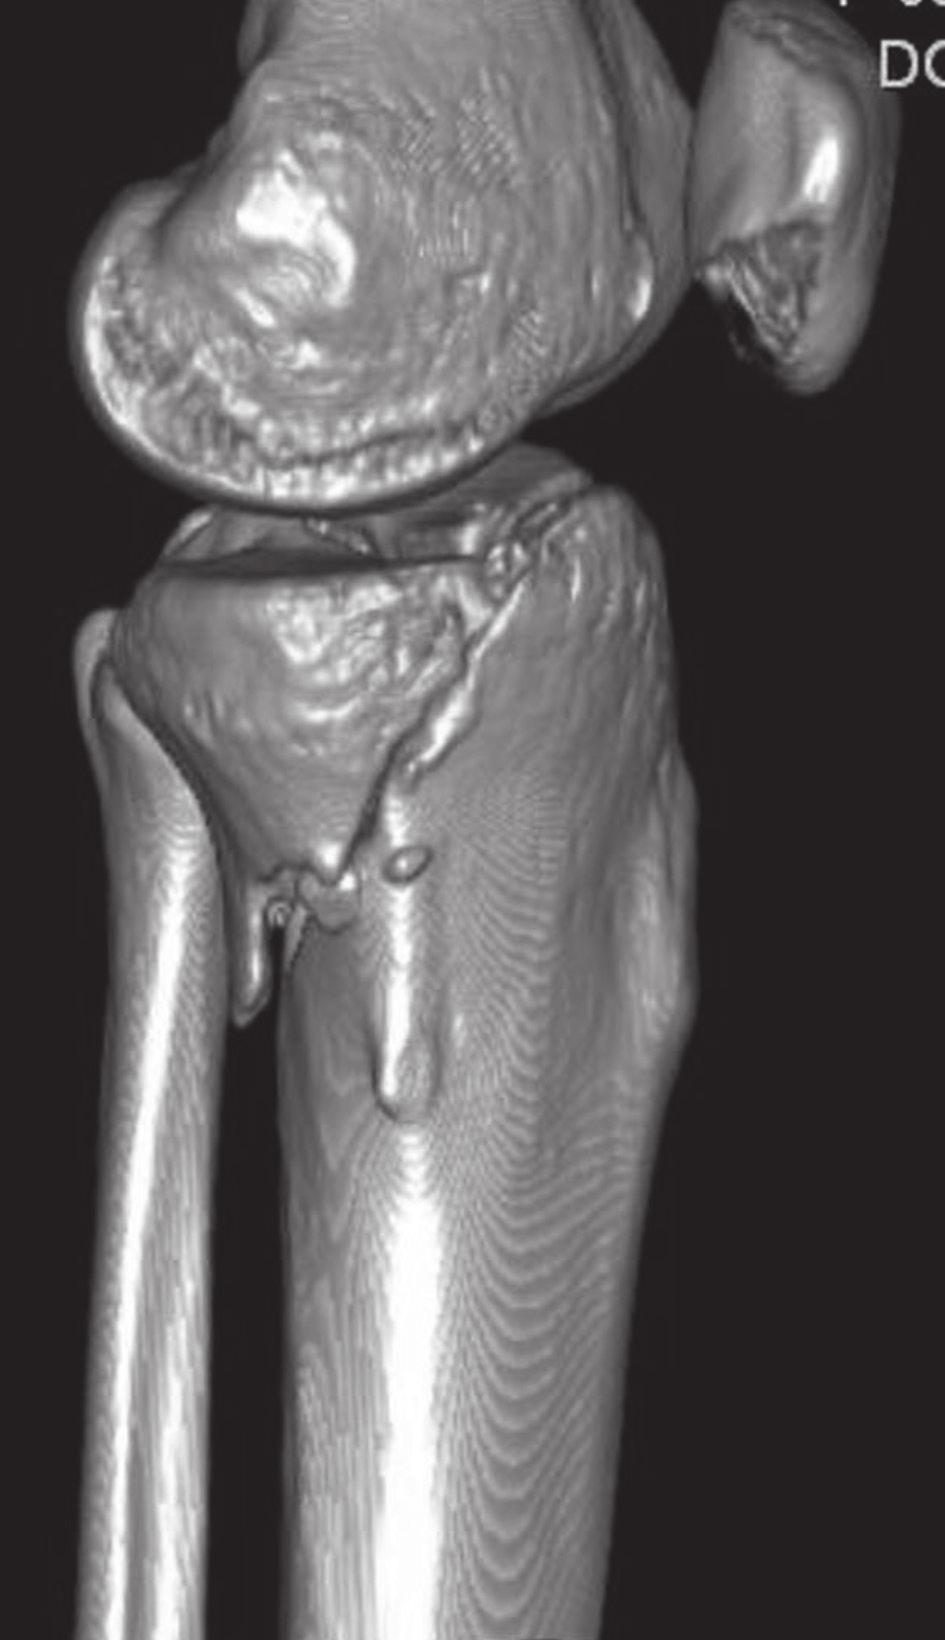 posteromedial tibial plateau fracture 262 c d c,d. Preoperative 3D CT reconstruction images of lateral and posterior views.